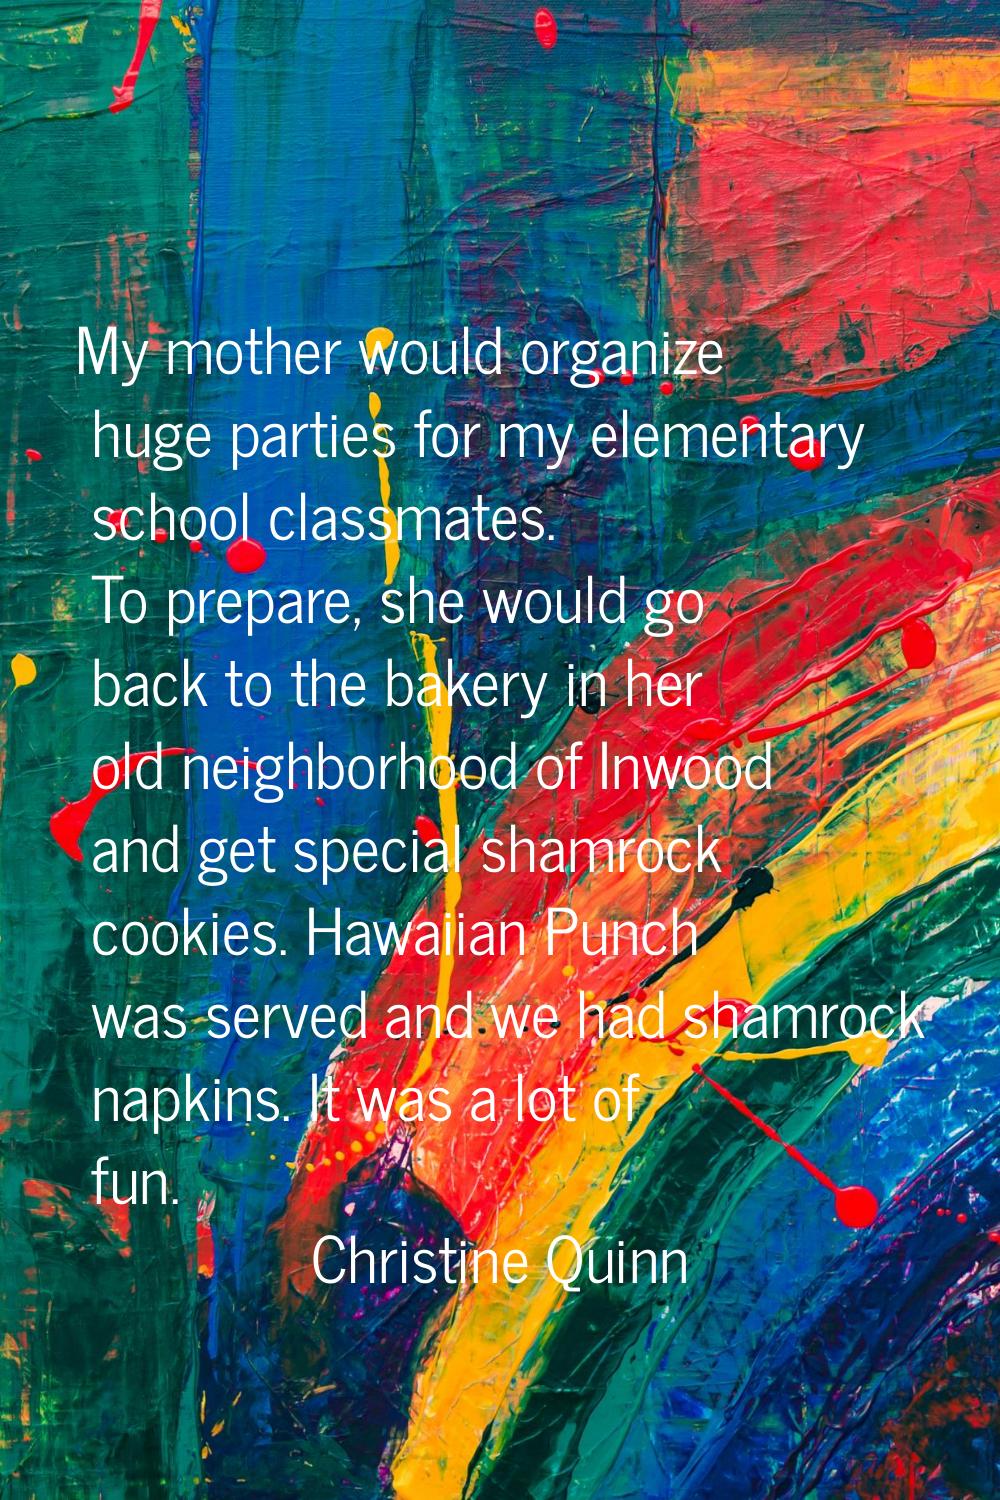 My mother would organize huge parties for my elementary school classmates. To prepare, she would go